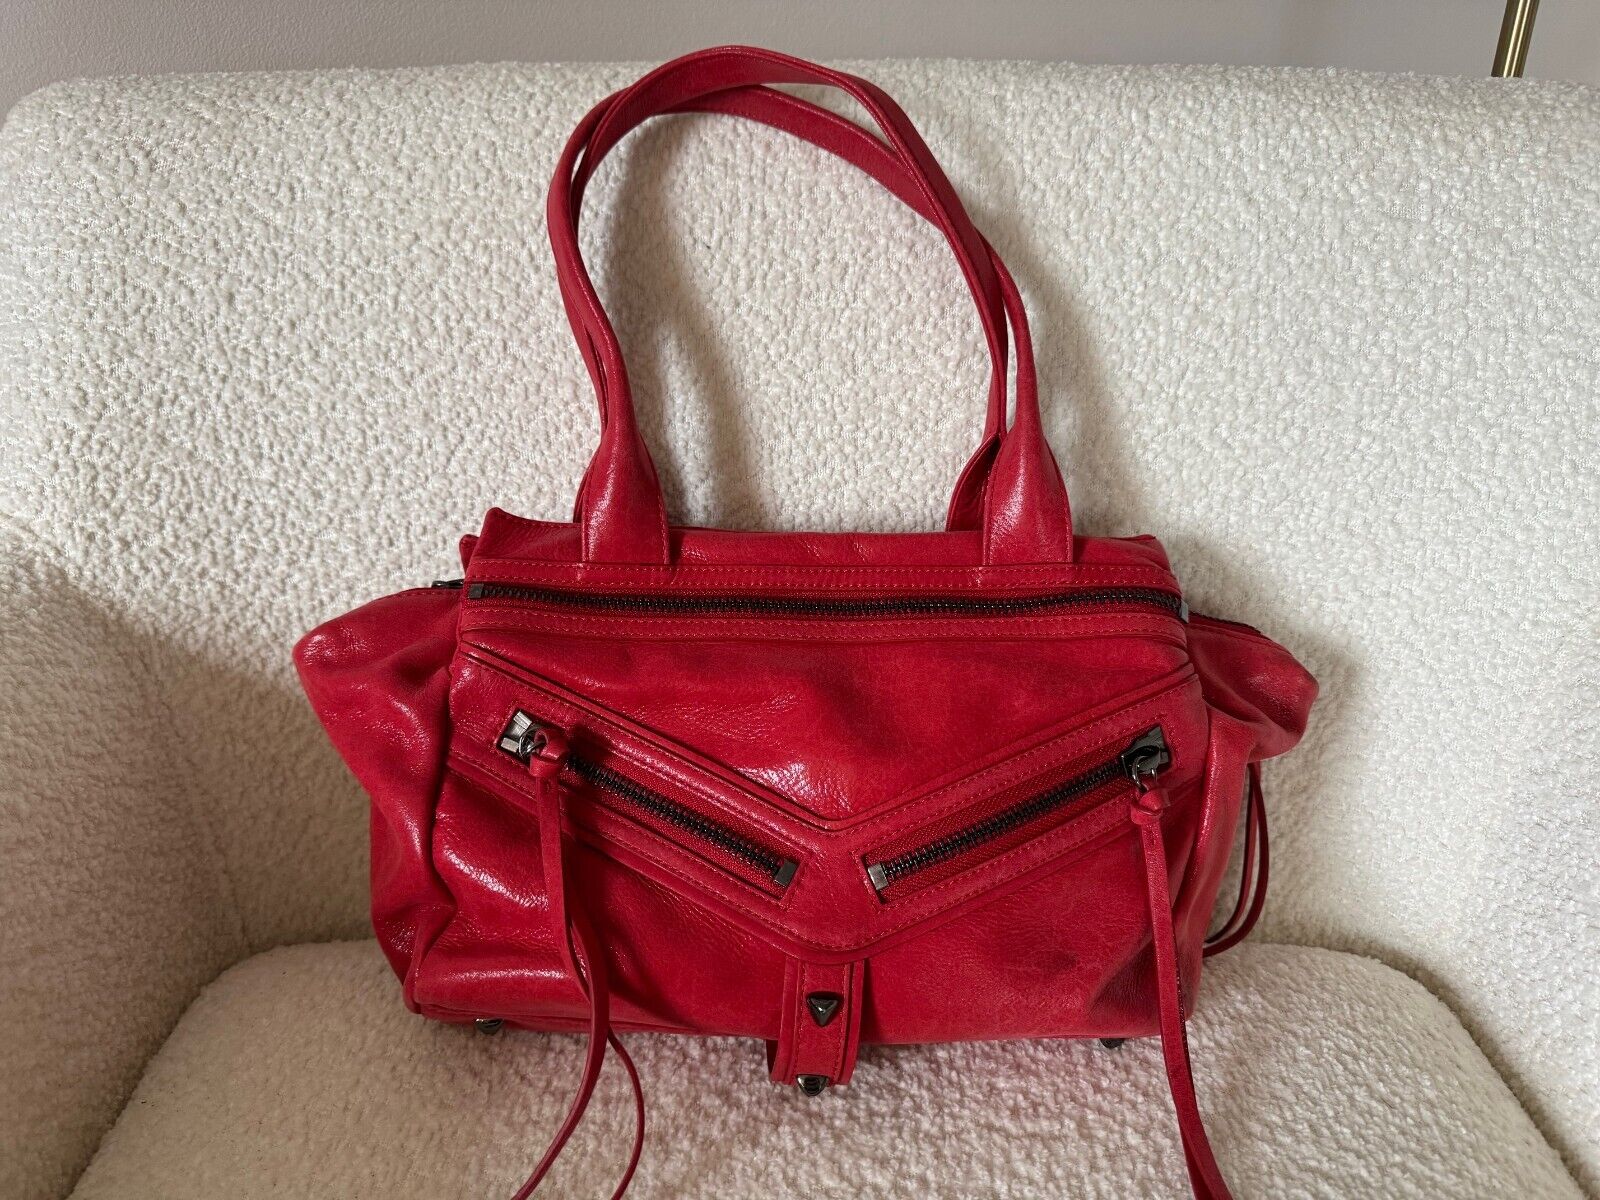 Botkier Trigger Motorcycle Bag, Bright Red LUXE Leather, Gunmetal Hardware